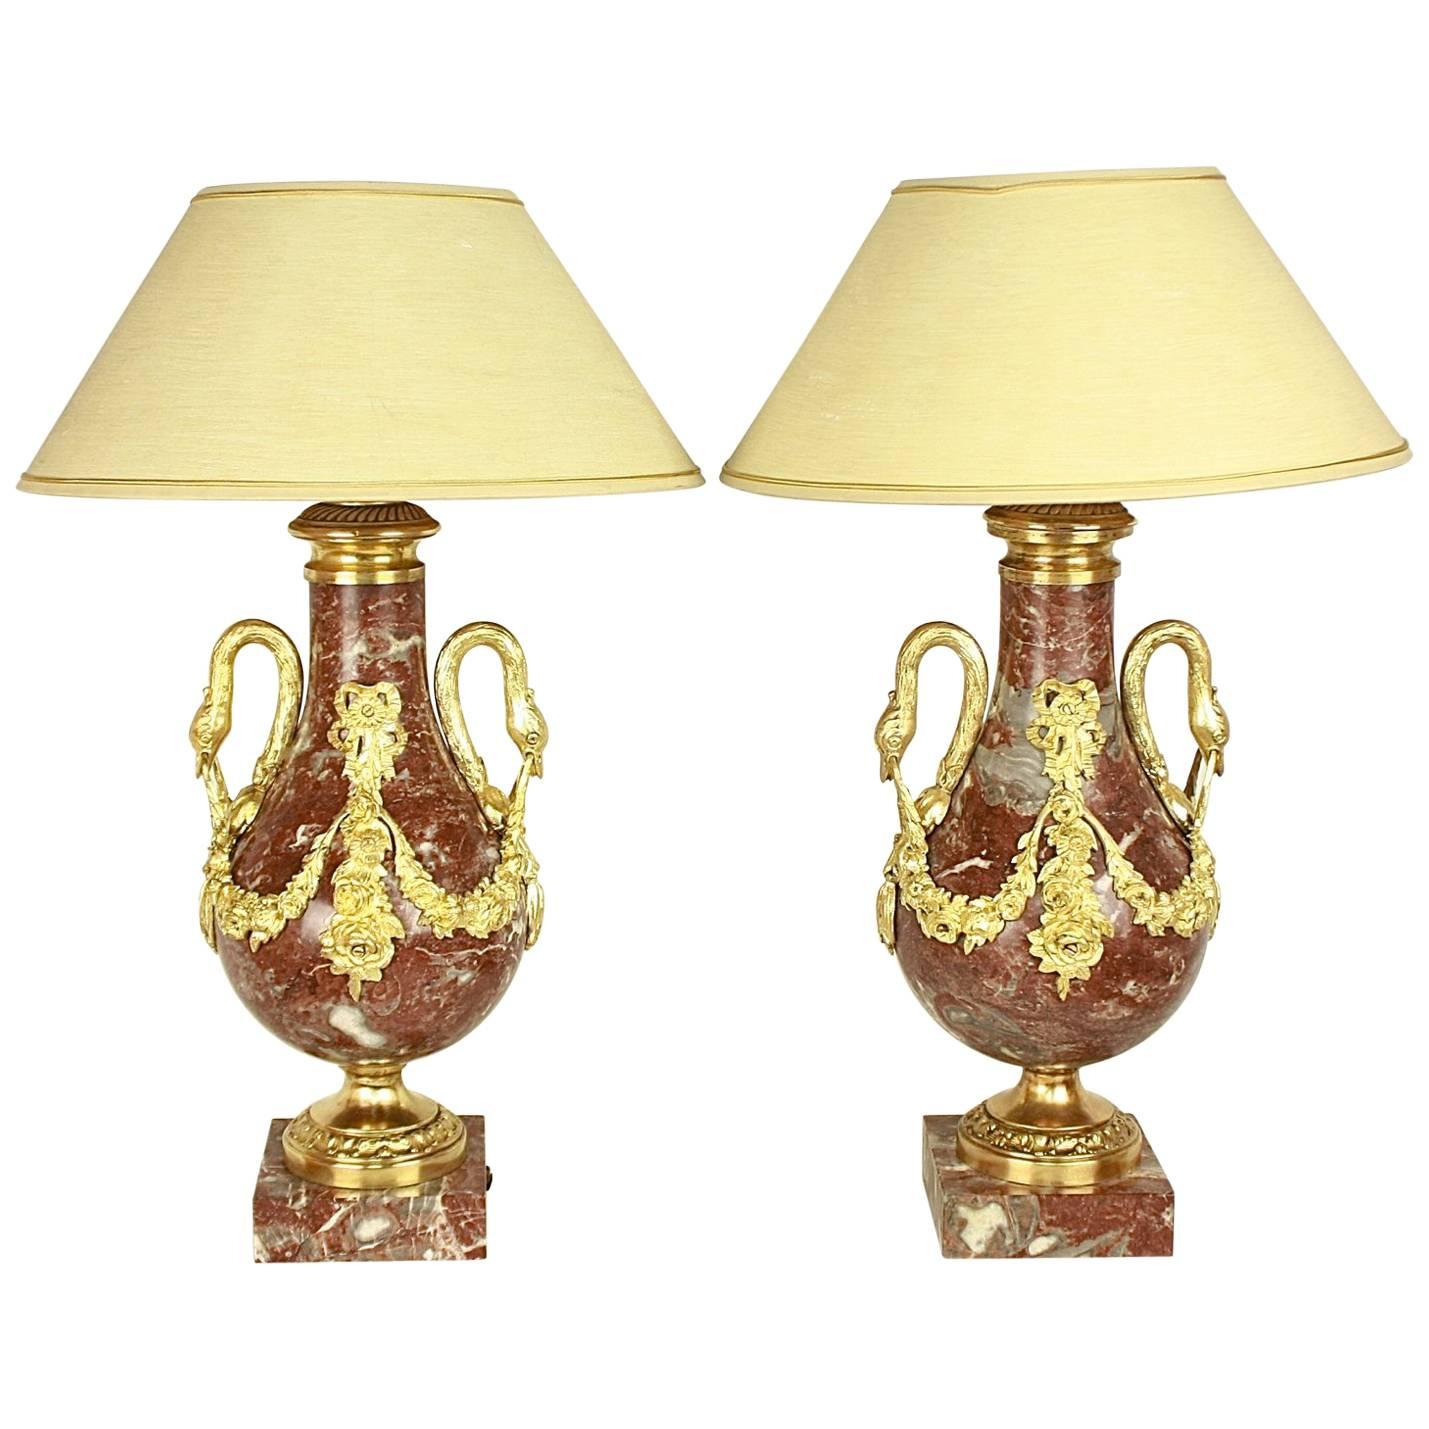 Pair of Louis XVI Style Red Marble and Gilt Bronze Mounted Table Lamps